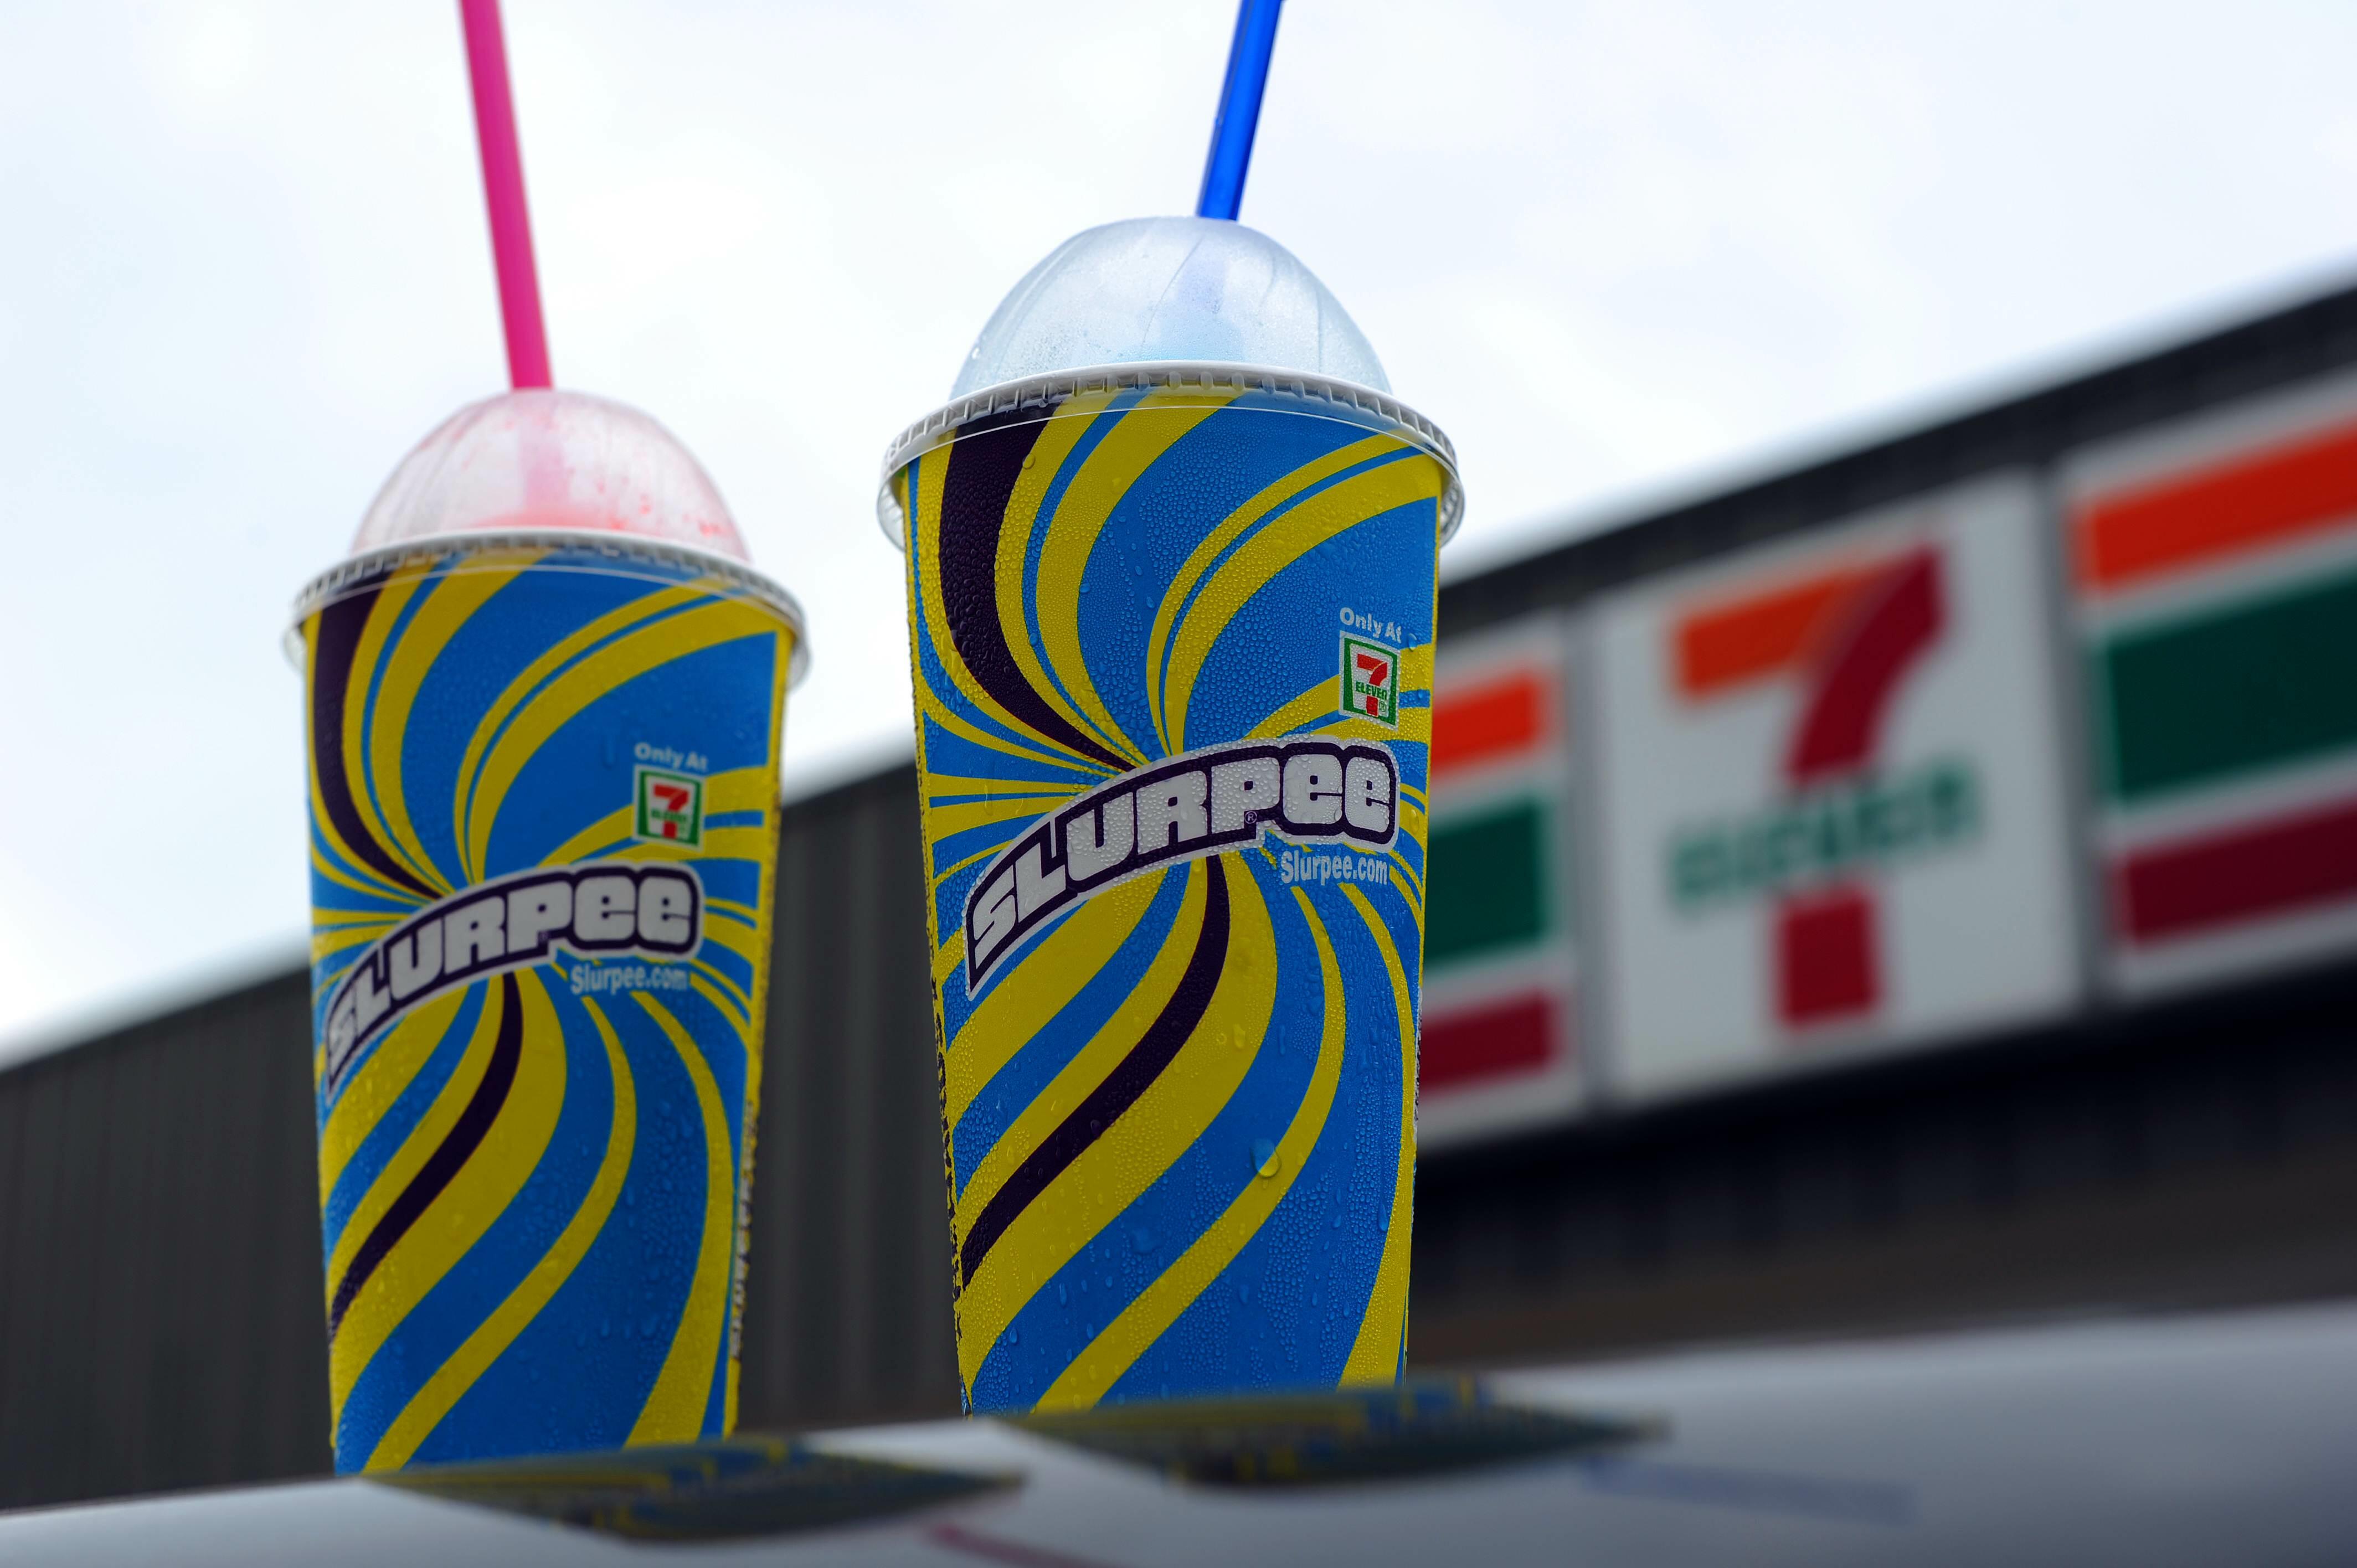 An illustration of Two, 7-Eleven Slurpees on October 27, 2010 in Washington, DC. Global convenience store chain 7-Eleven has been getting some free advertising for its signature drink the Slurpee from none other than US President Barack Obama. Obama has u